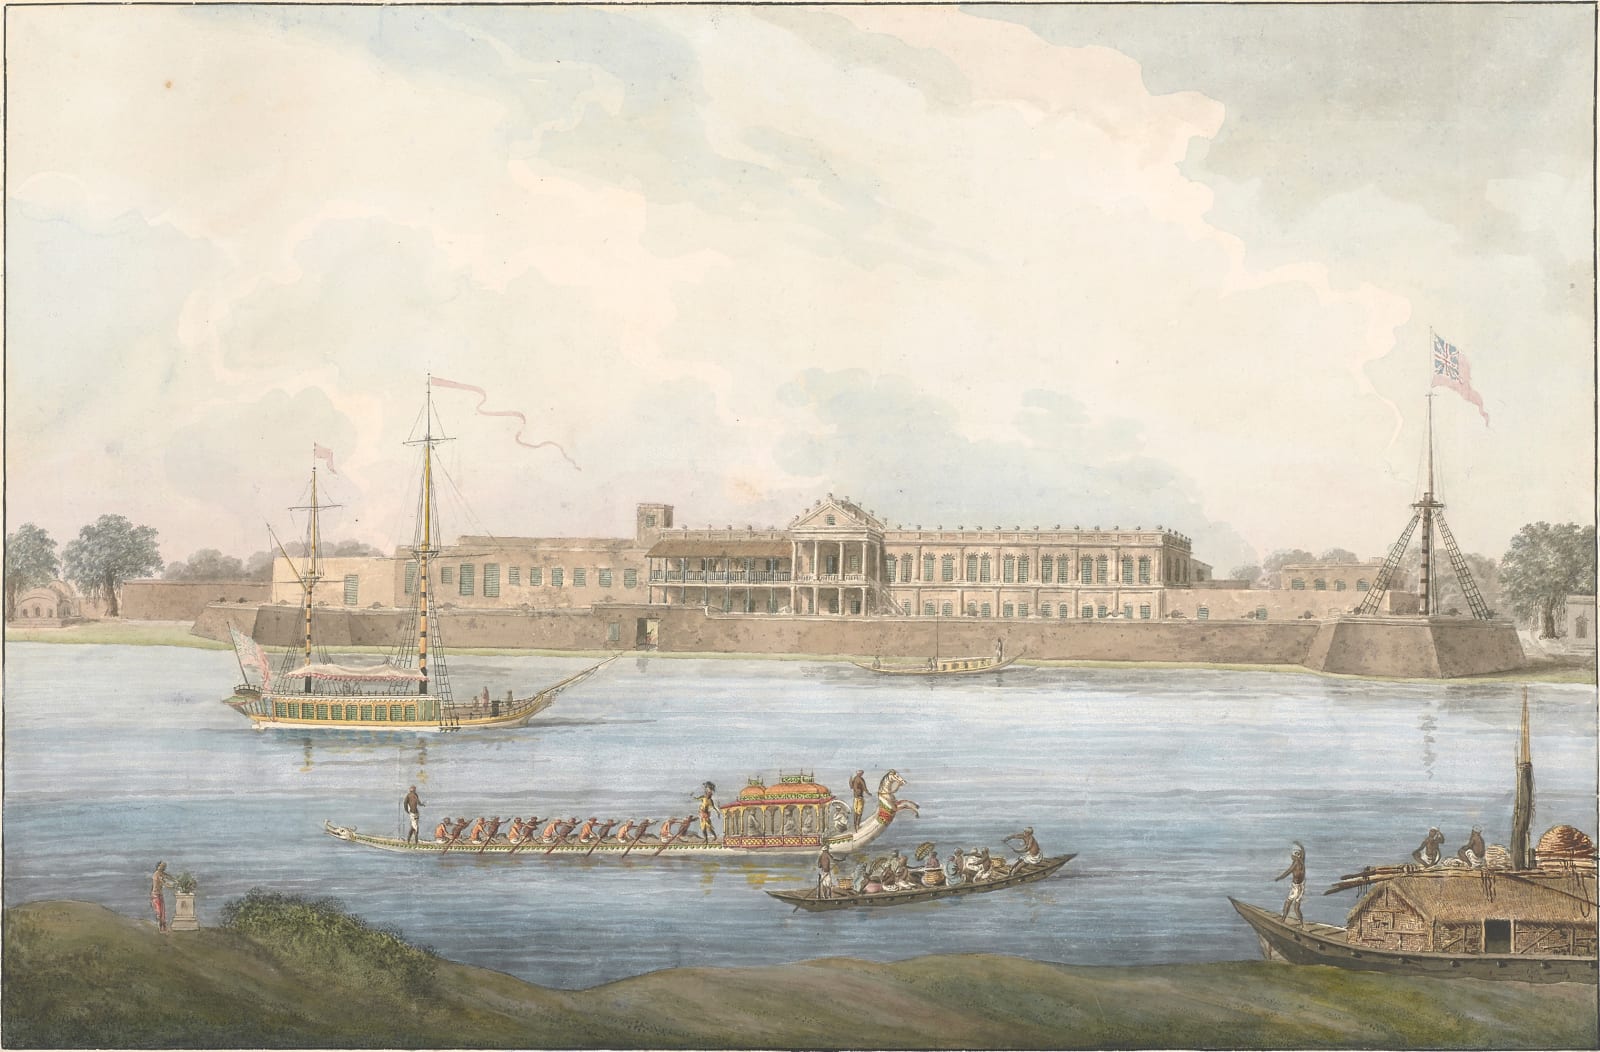 View of the East India Company factory at Cossimbazar from the other side of the Hooghly river; inside its fortifications, flying the Union flag, with a pinnace budgerow (with the same flag) and a horse-headed boat on the river (vieille fattorie de Bassem, Murshidabad, 1795–1810